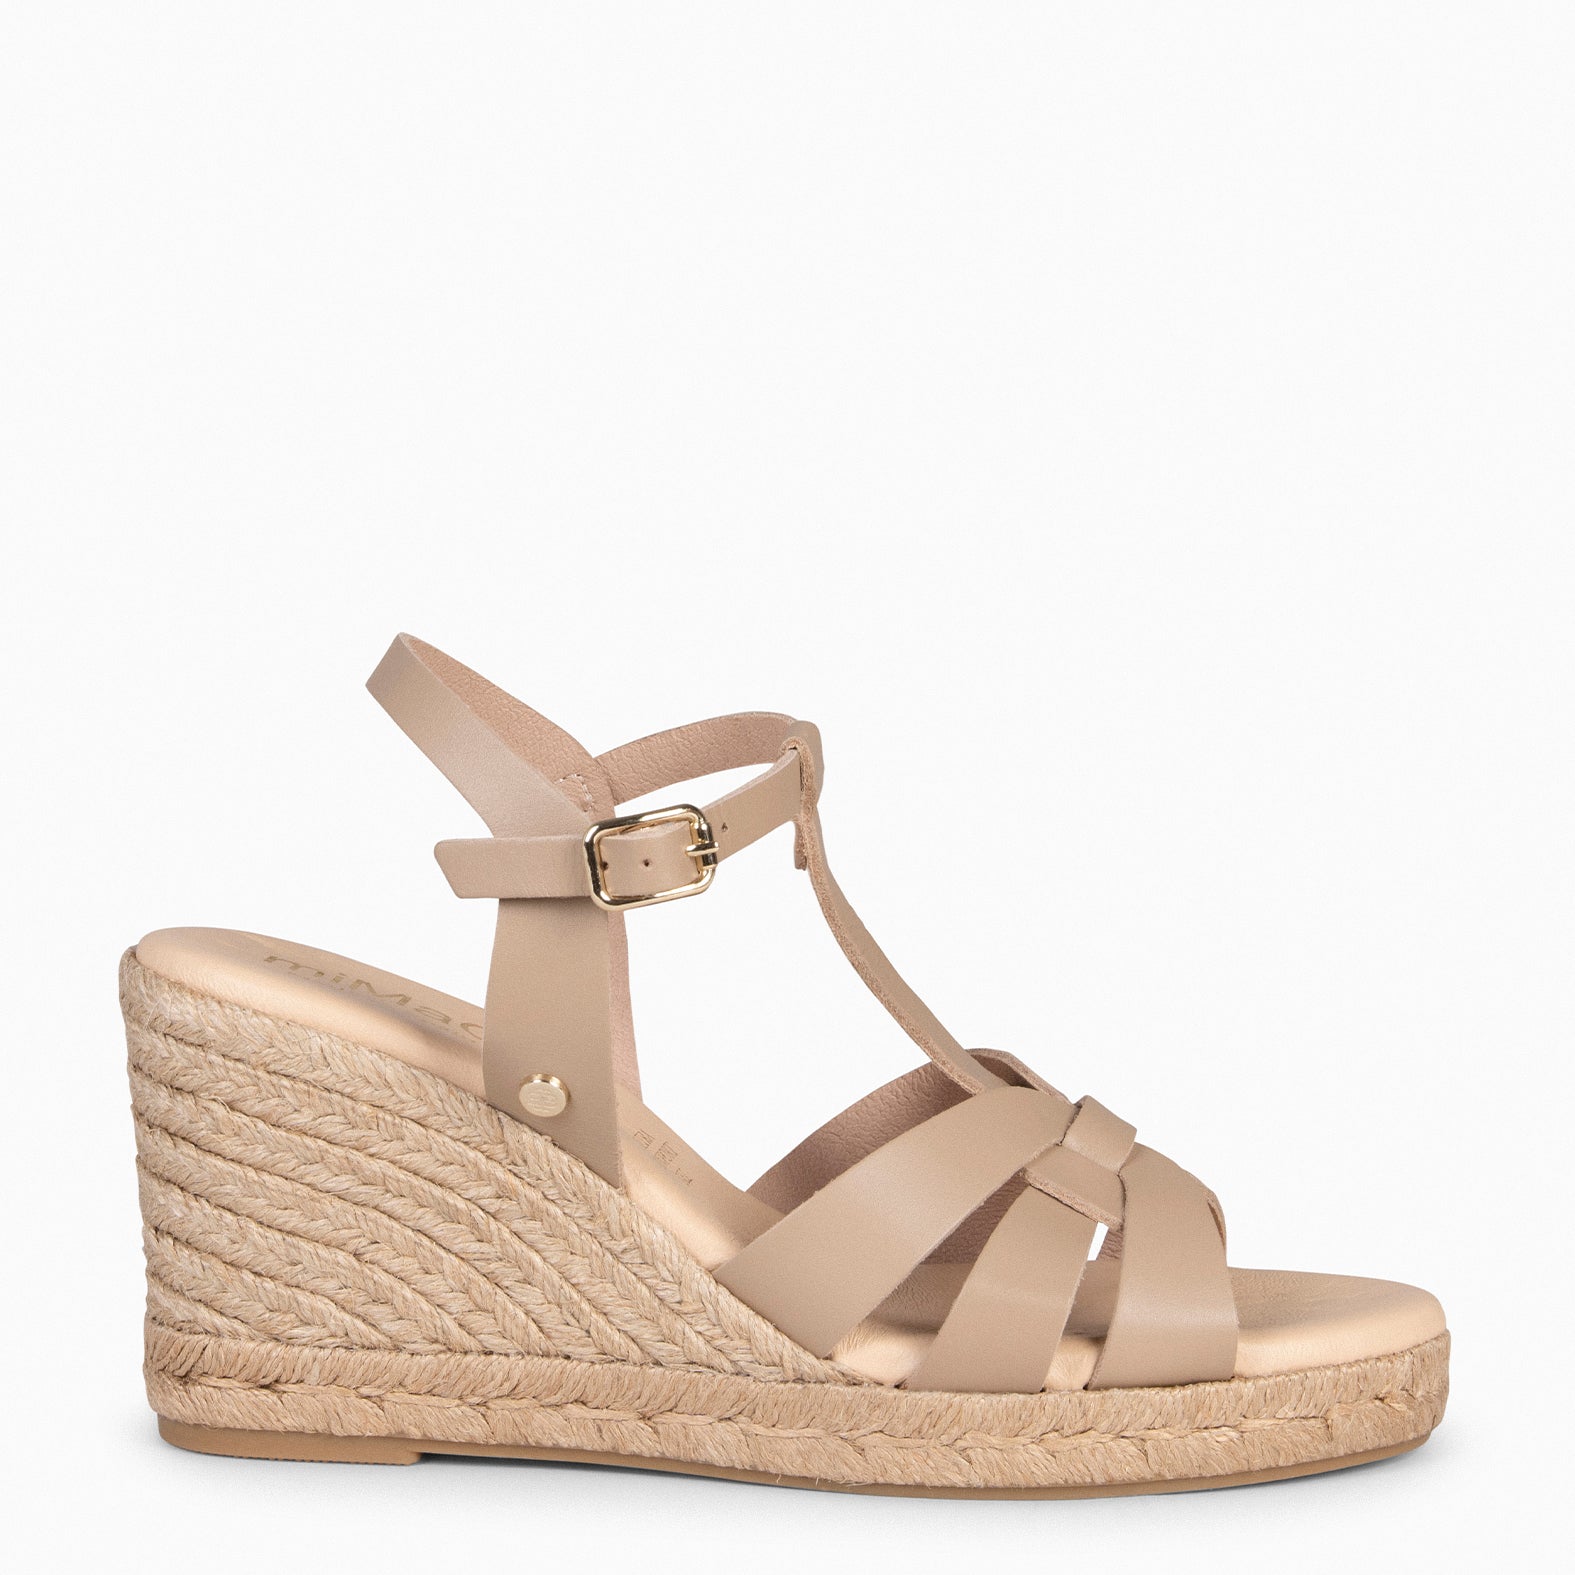 VALERIE – TAUPE Espadrilles with Straps